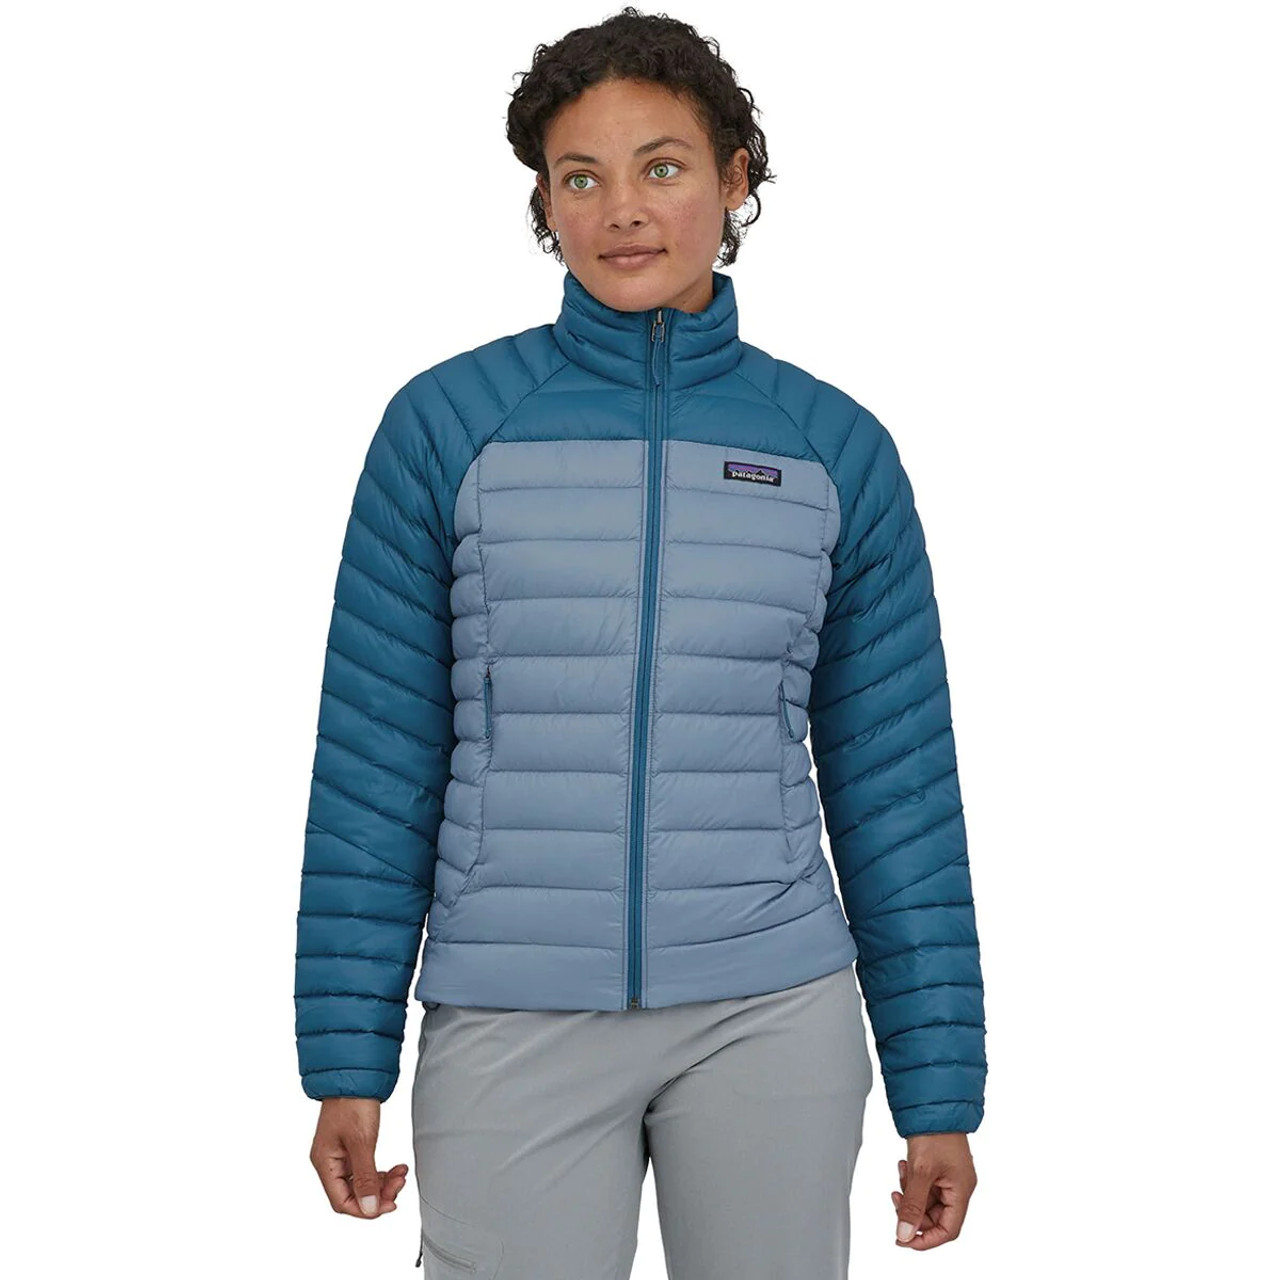 Patagonia Women's Down Sweater Jacket - New Navy